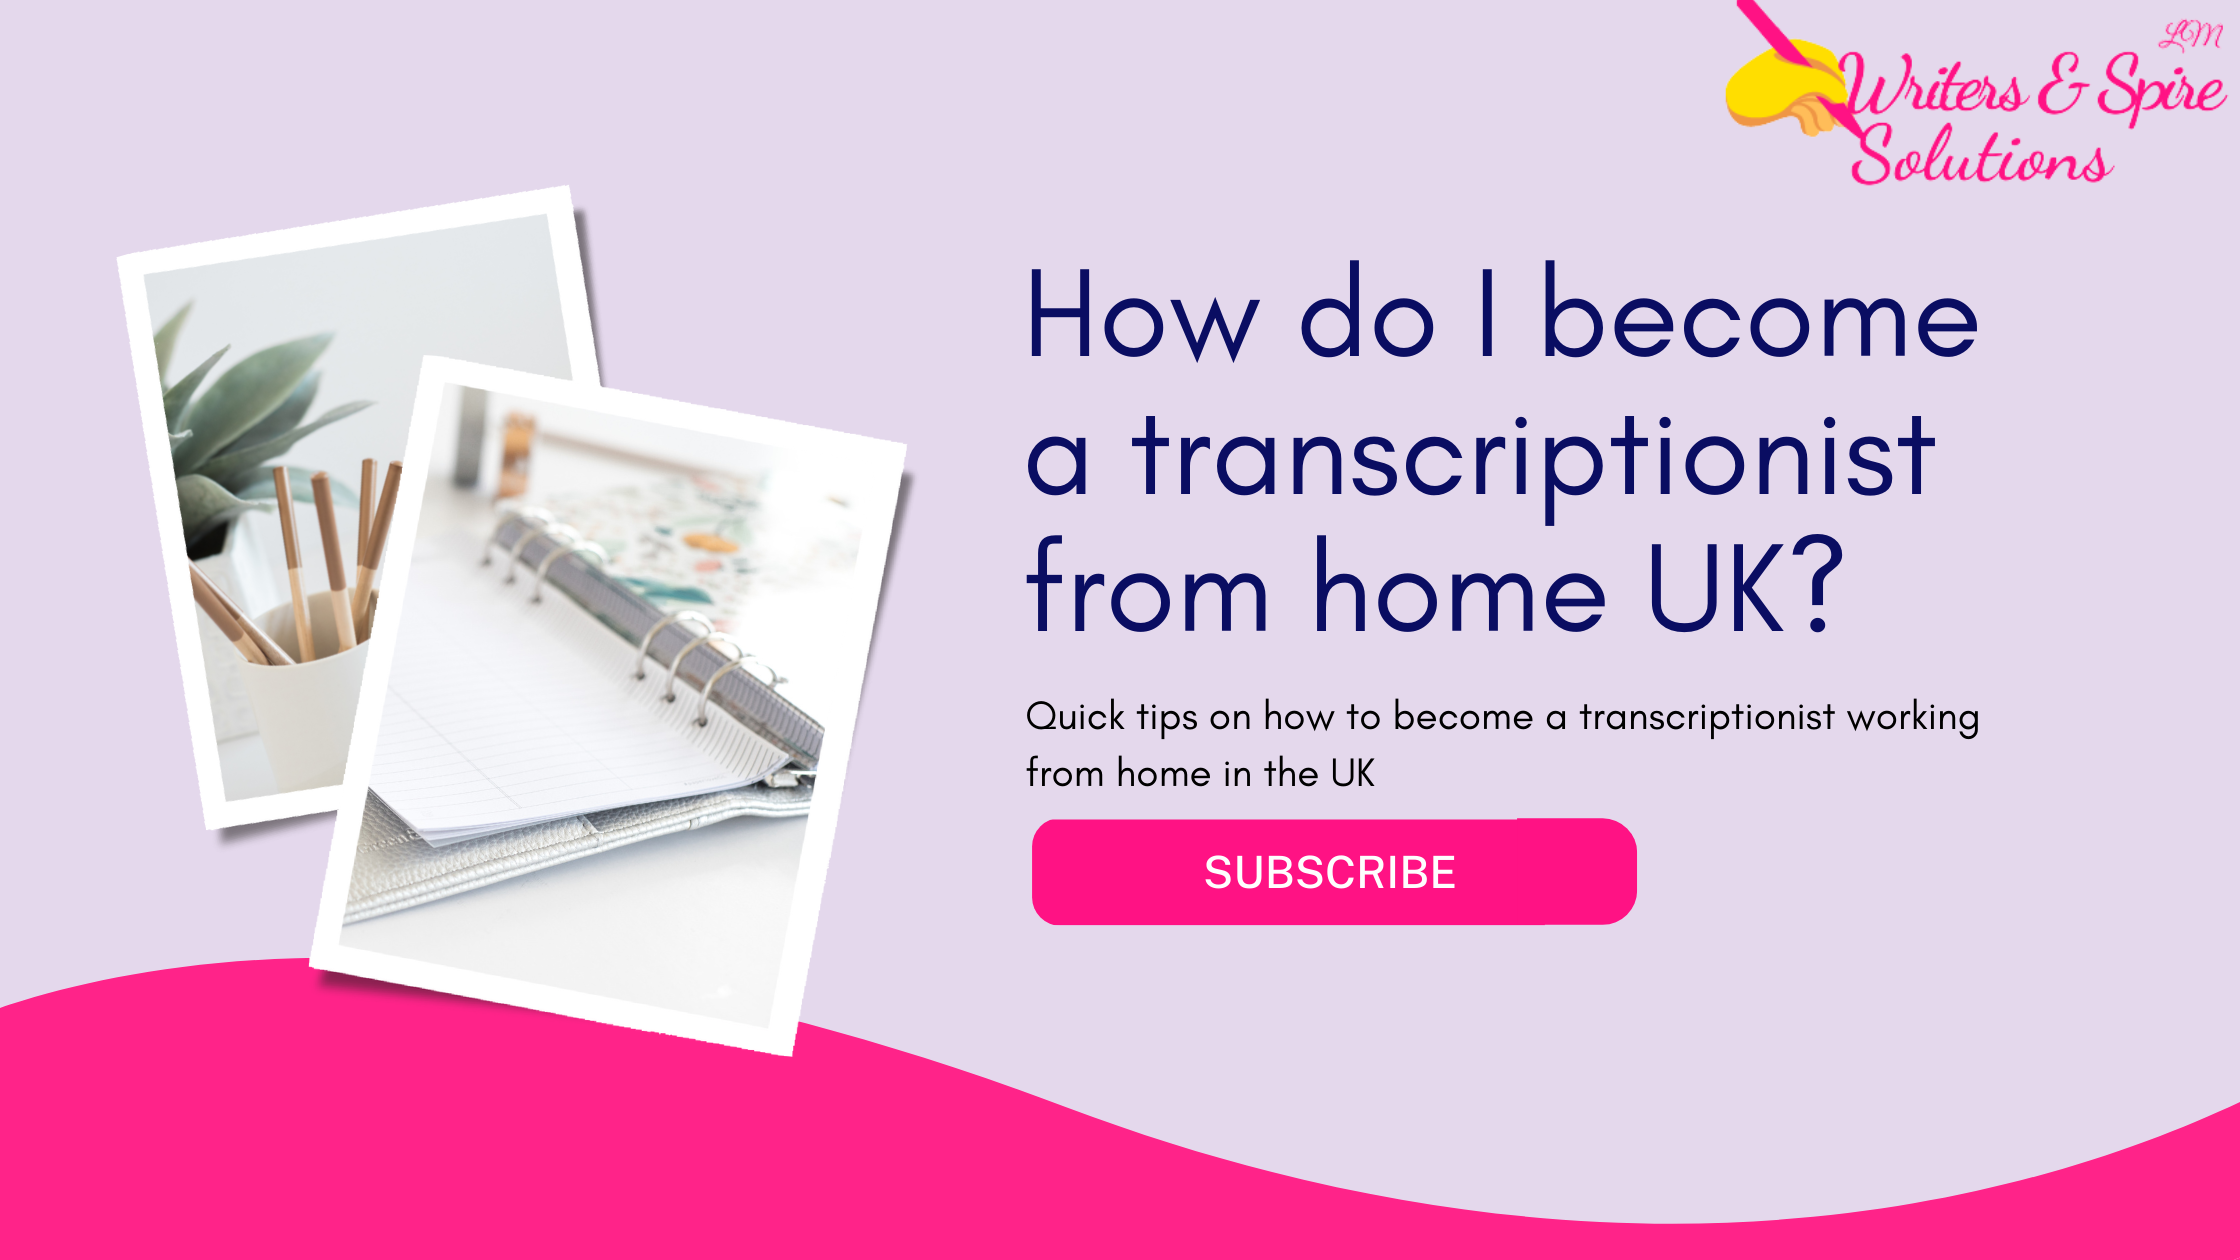 How do I become a transcriptionist from home UK?